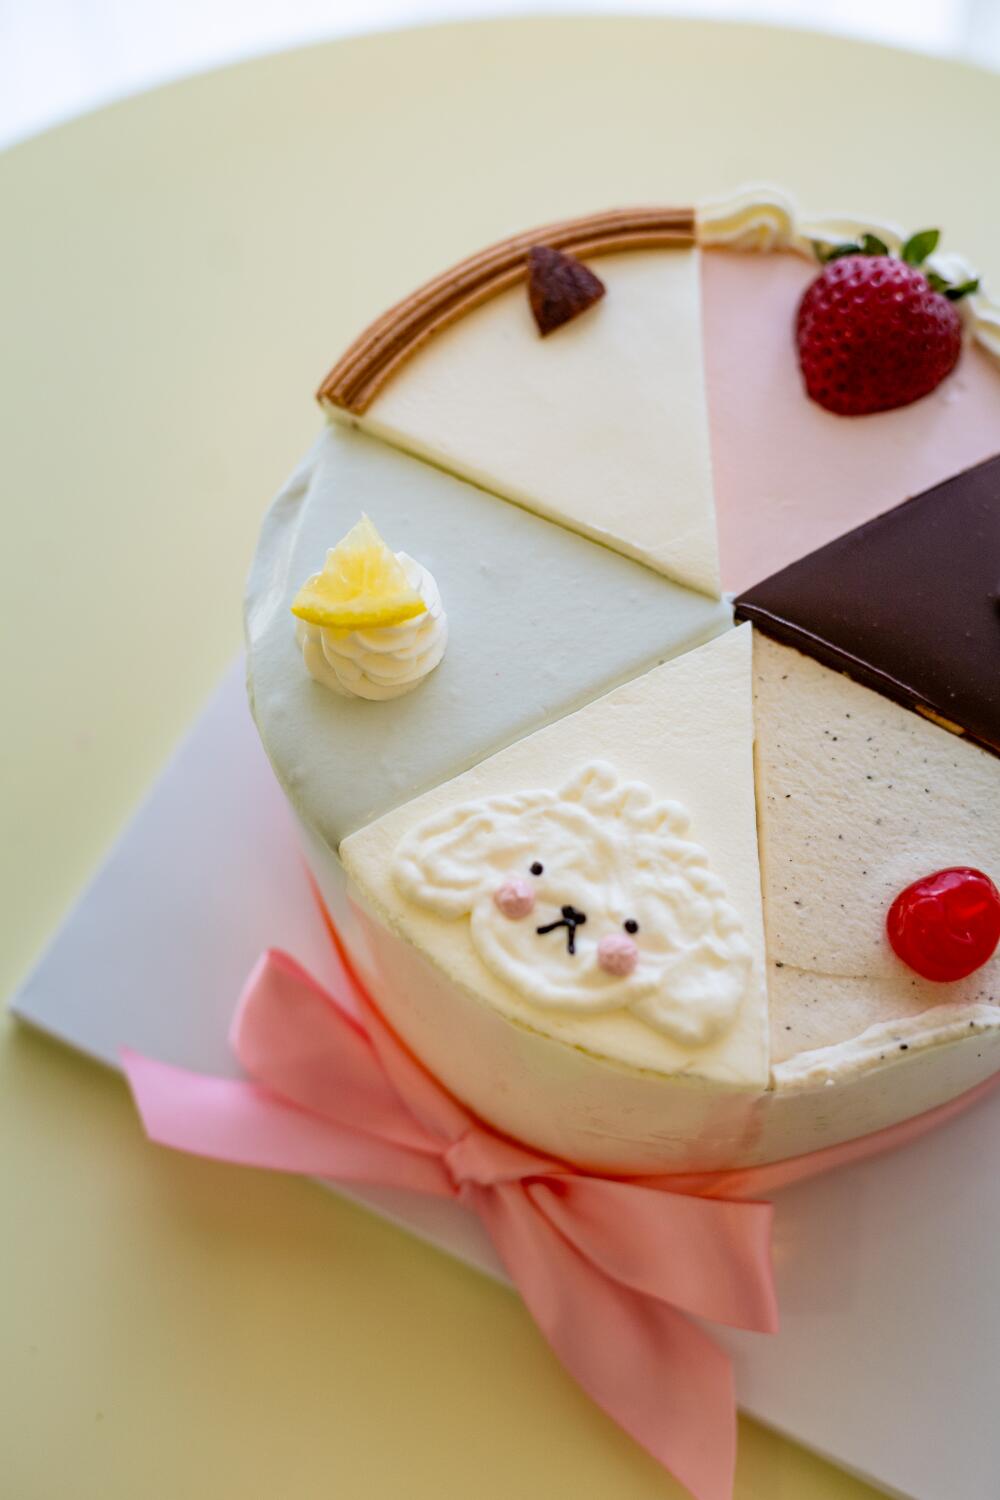 The Korean minimalist cake trend is here to stay. Get in line at this viral Koreatown bakery